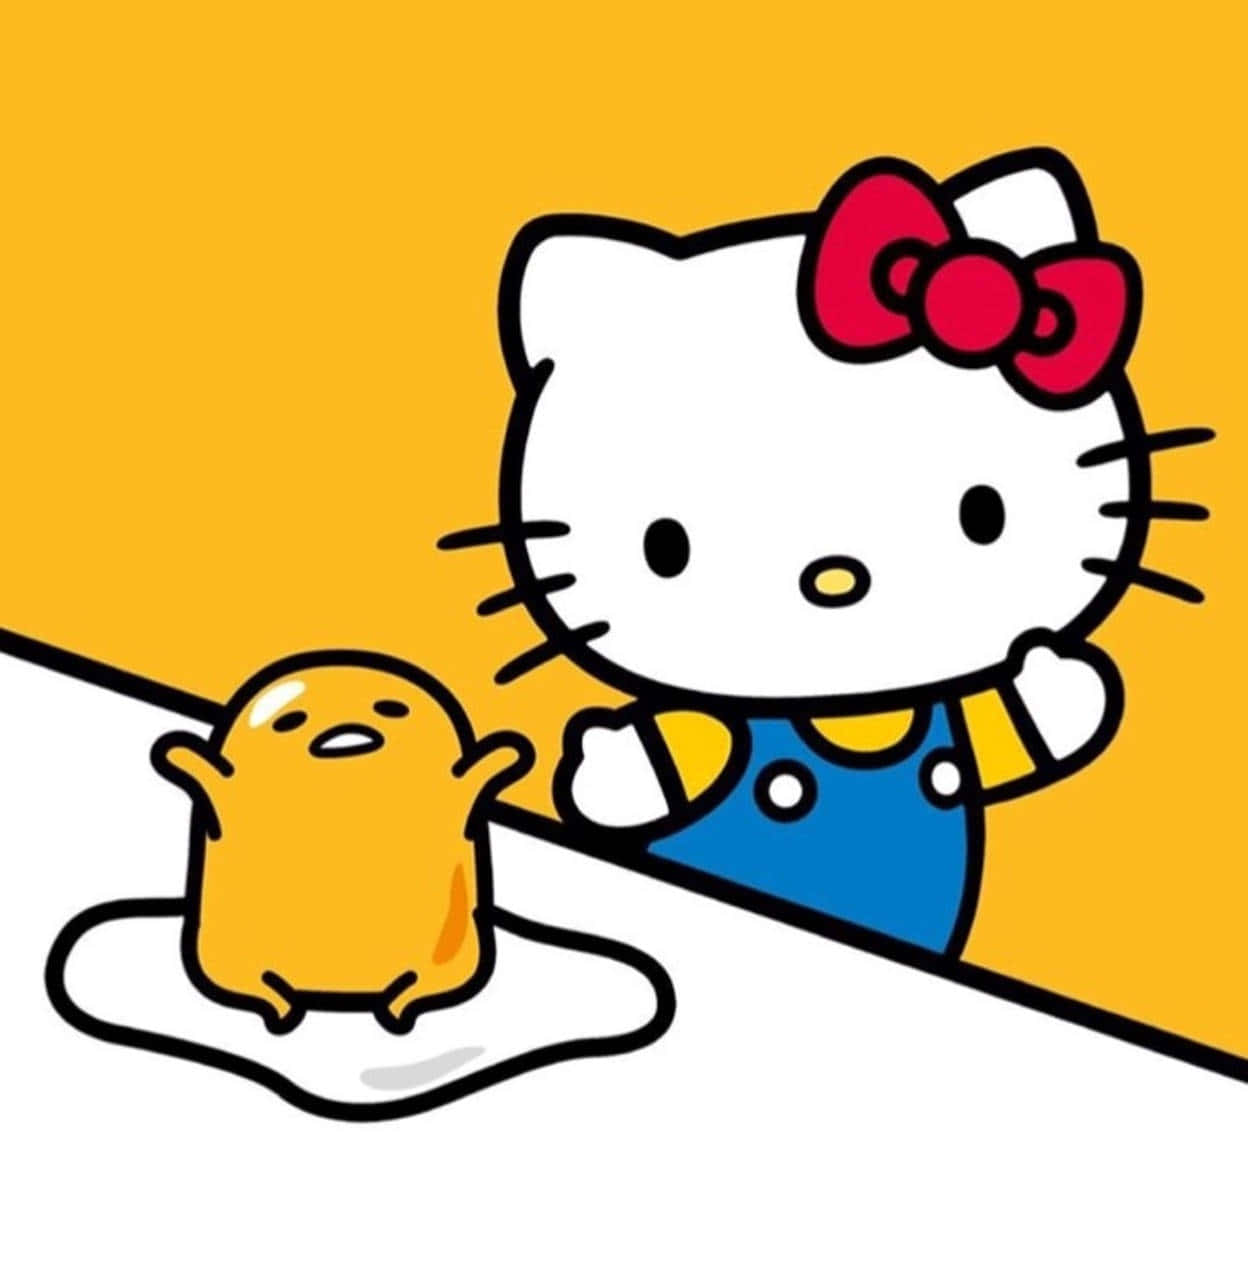 Get Your Work Done in Style with Gudetama Computer Wallpaper